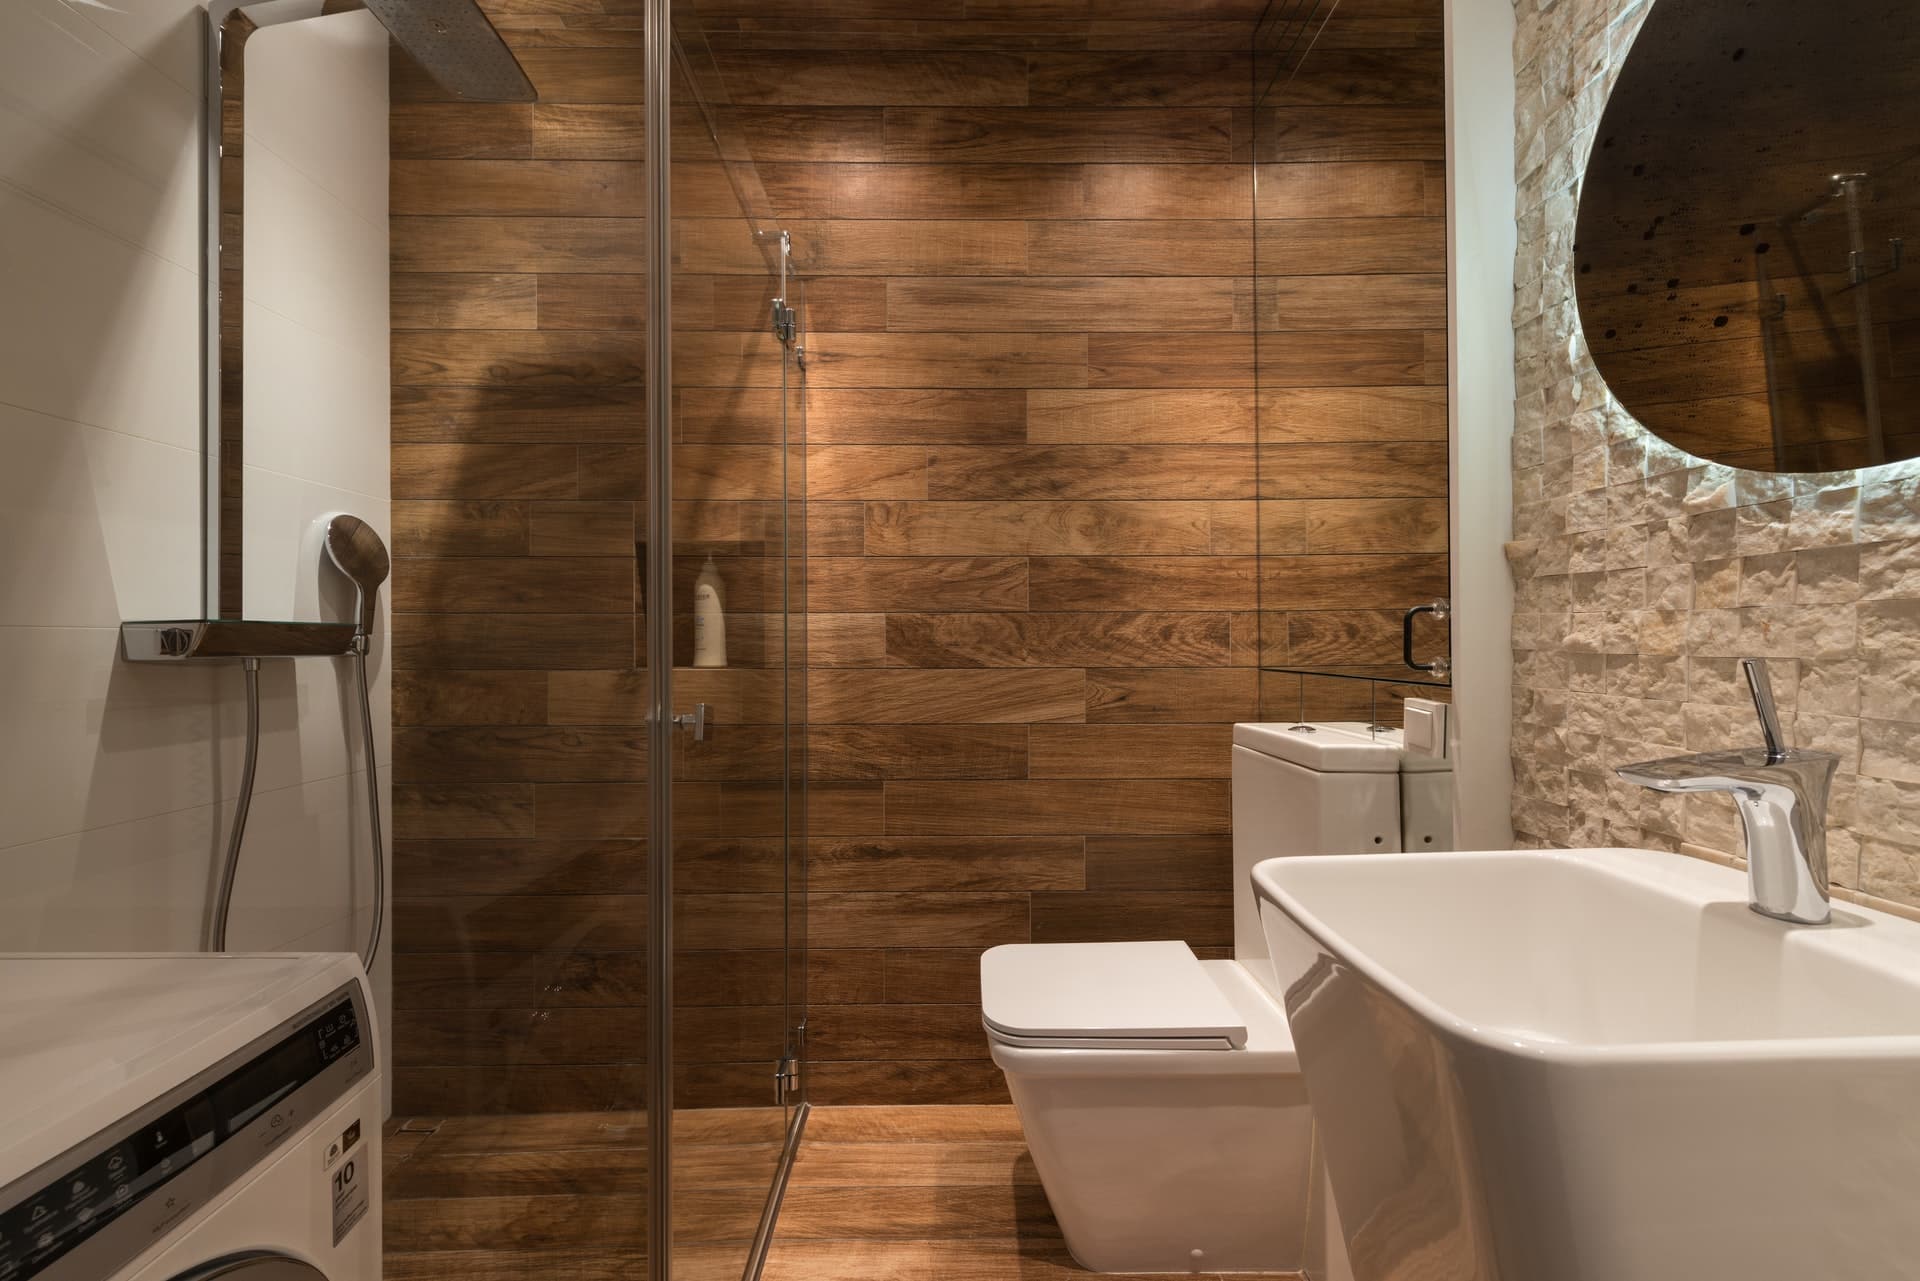 General Rules For Bathroom Layouts